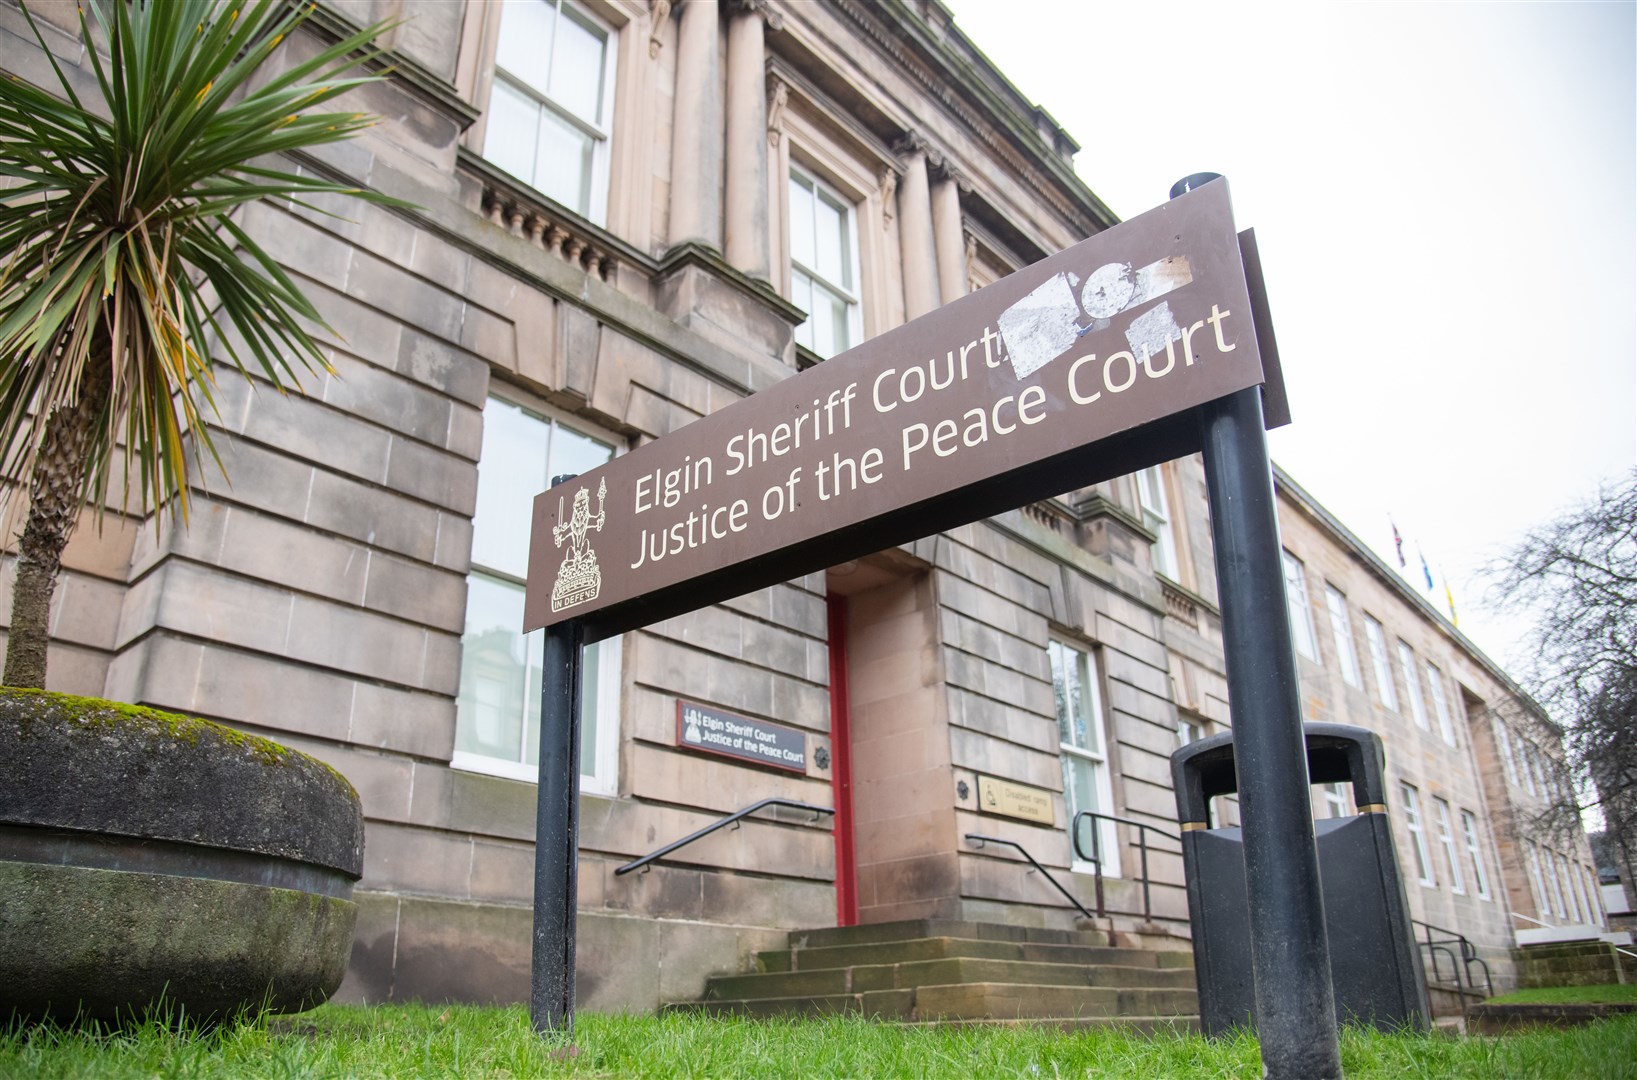 The case was heard at Elgin Sheriff Court. Picture: Daniel Forsyth